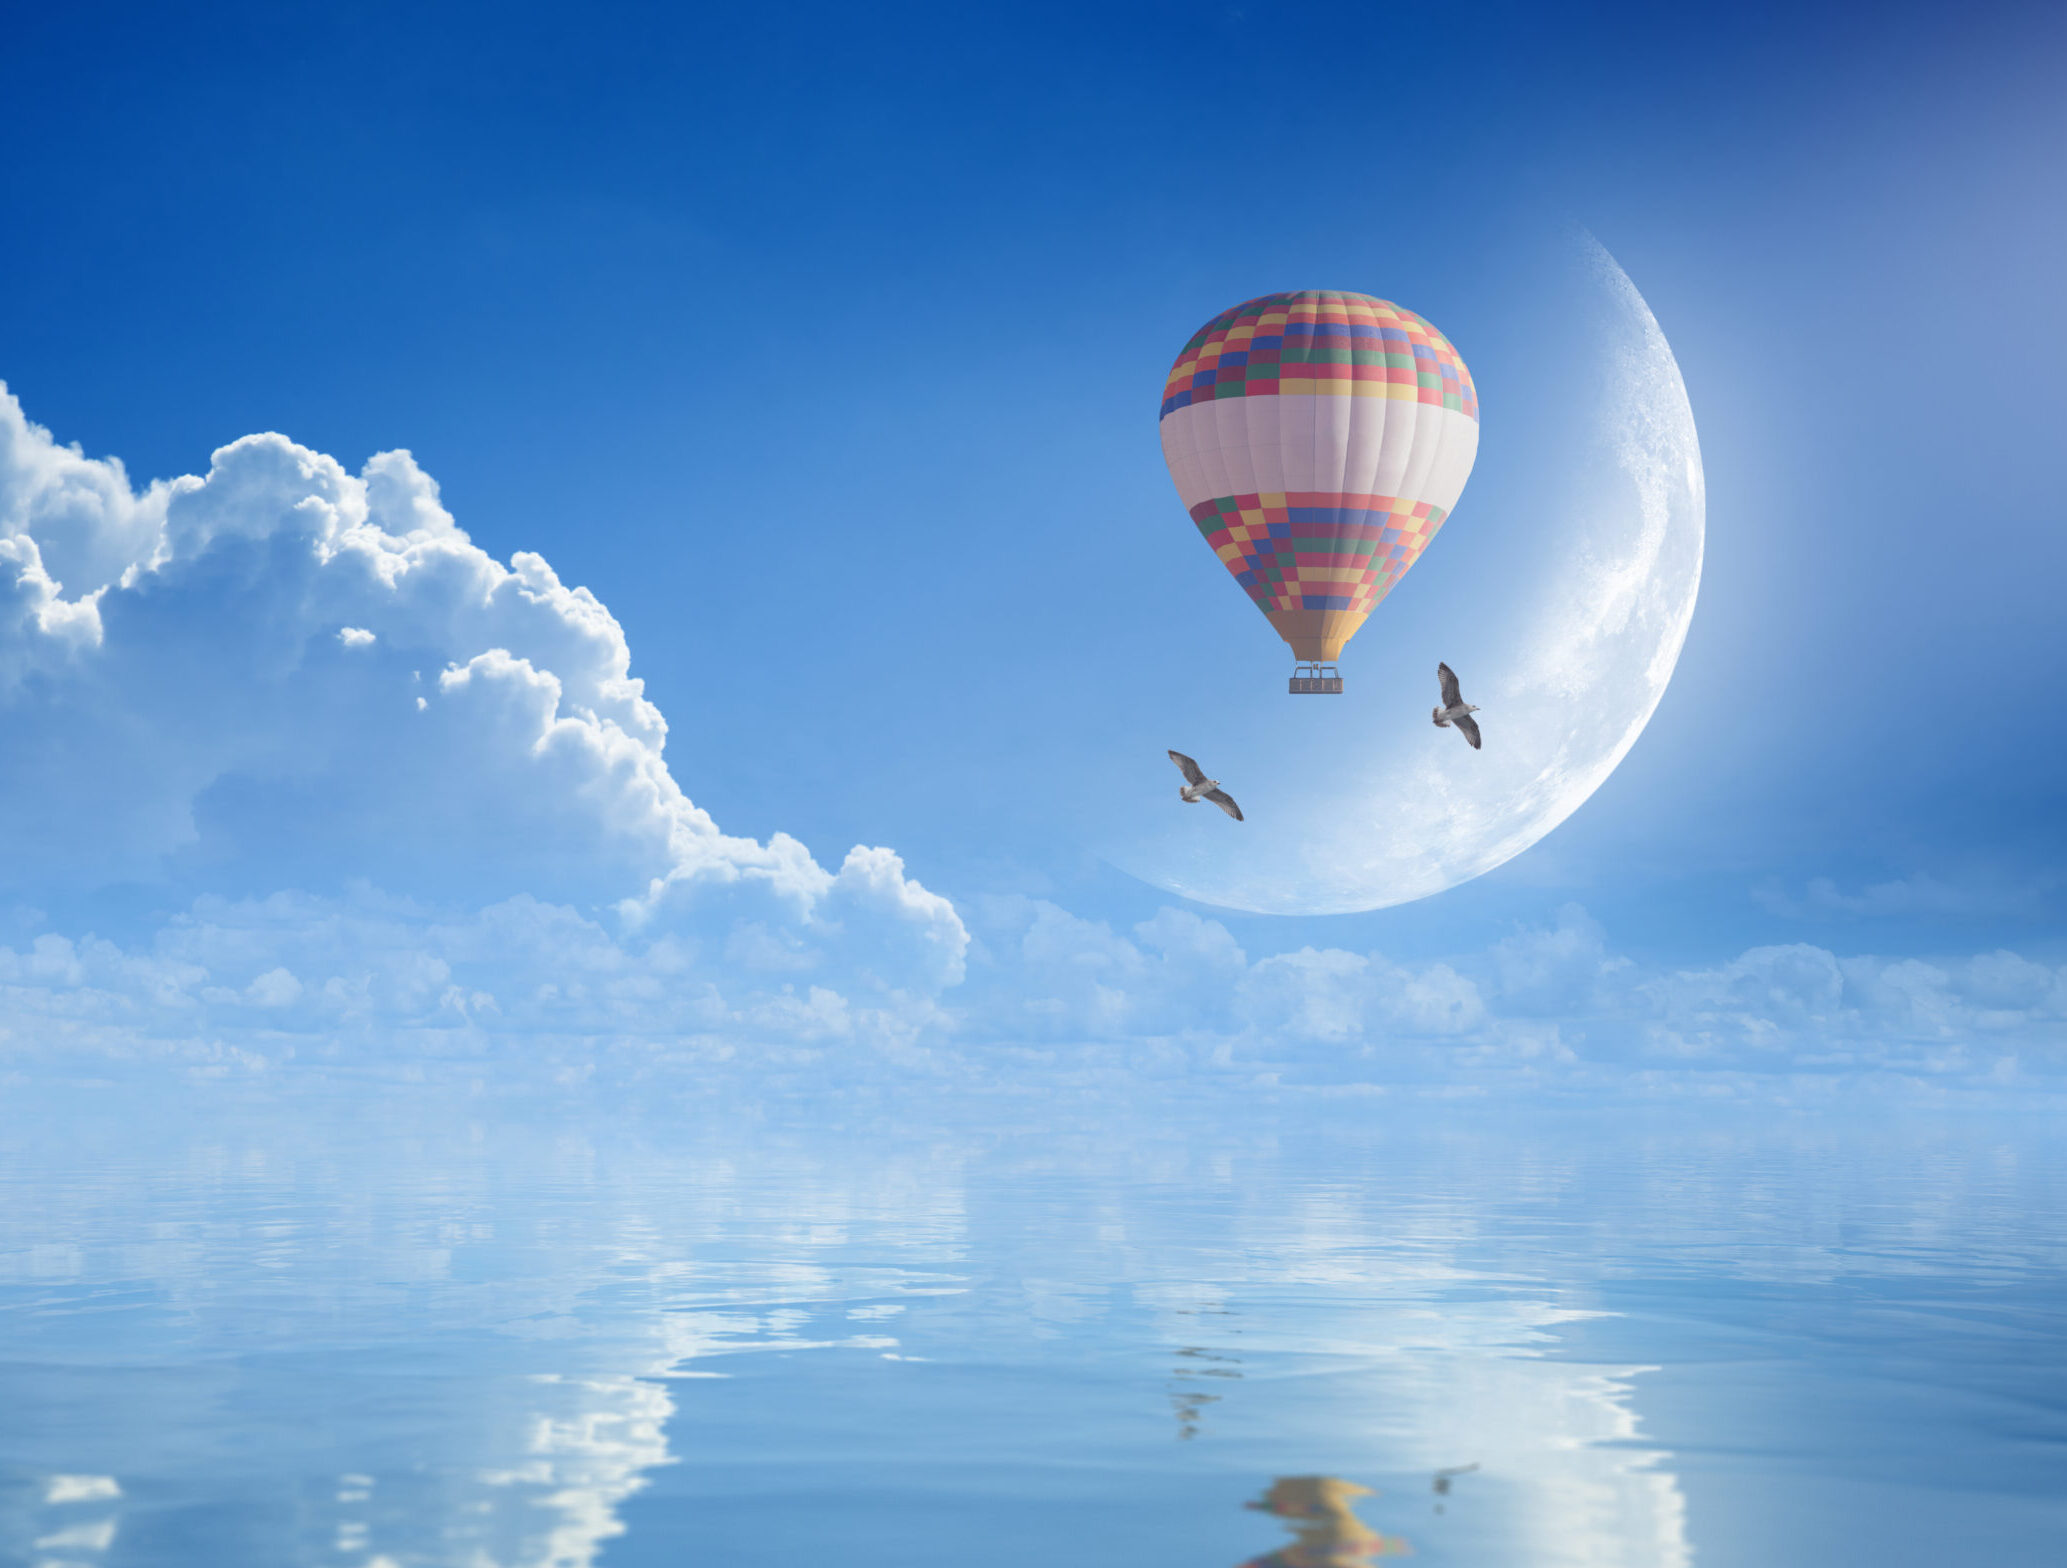 Idyllic,Heavenly,Picture,-,Colorful,Hot,Air,Balloon,,Two,Seagulls